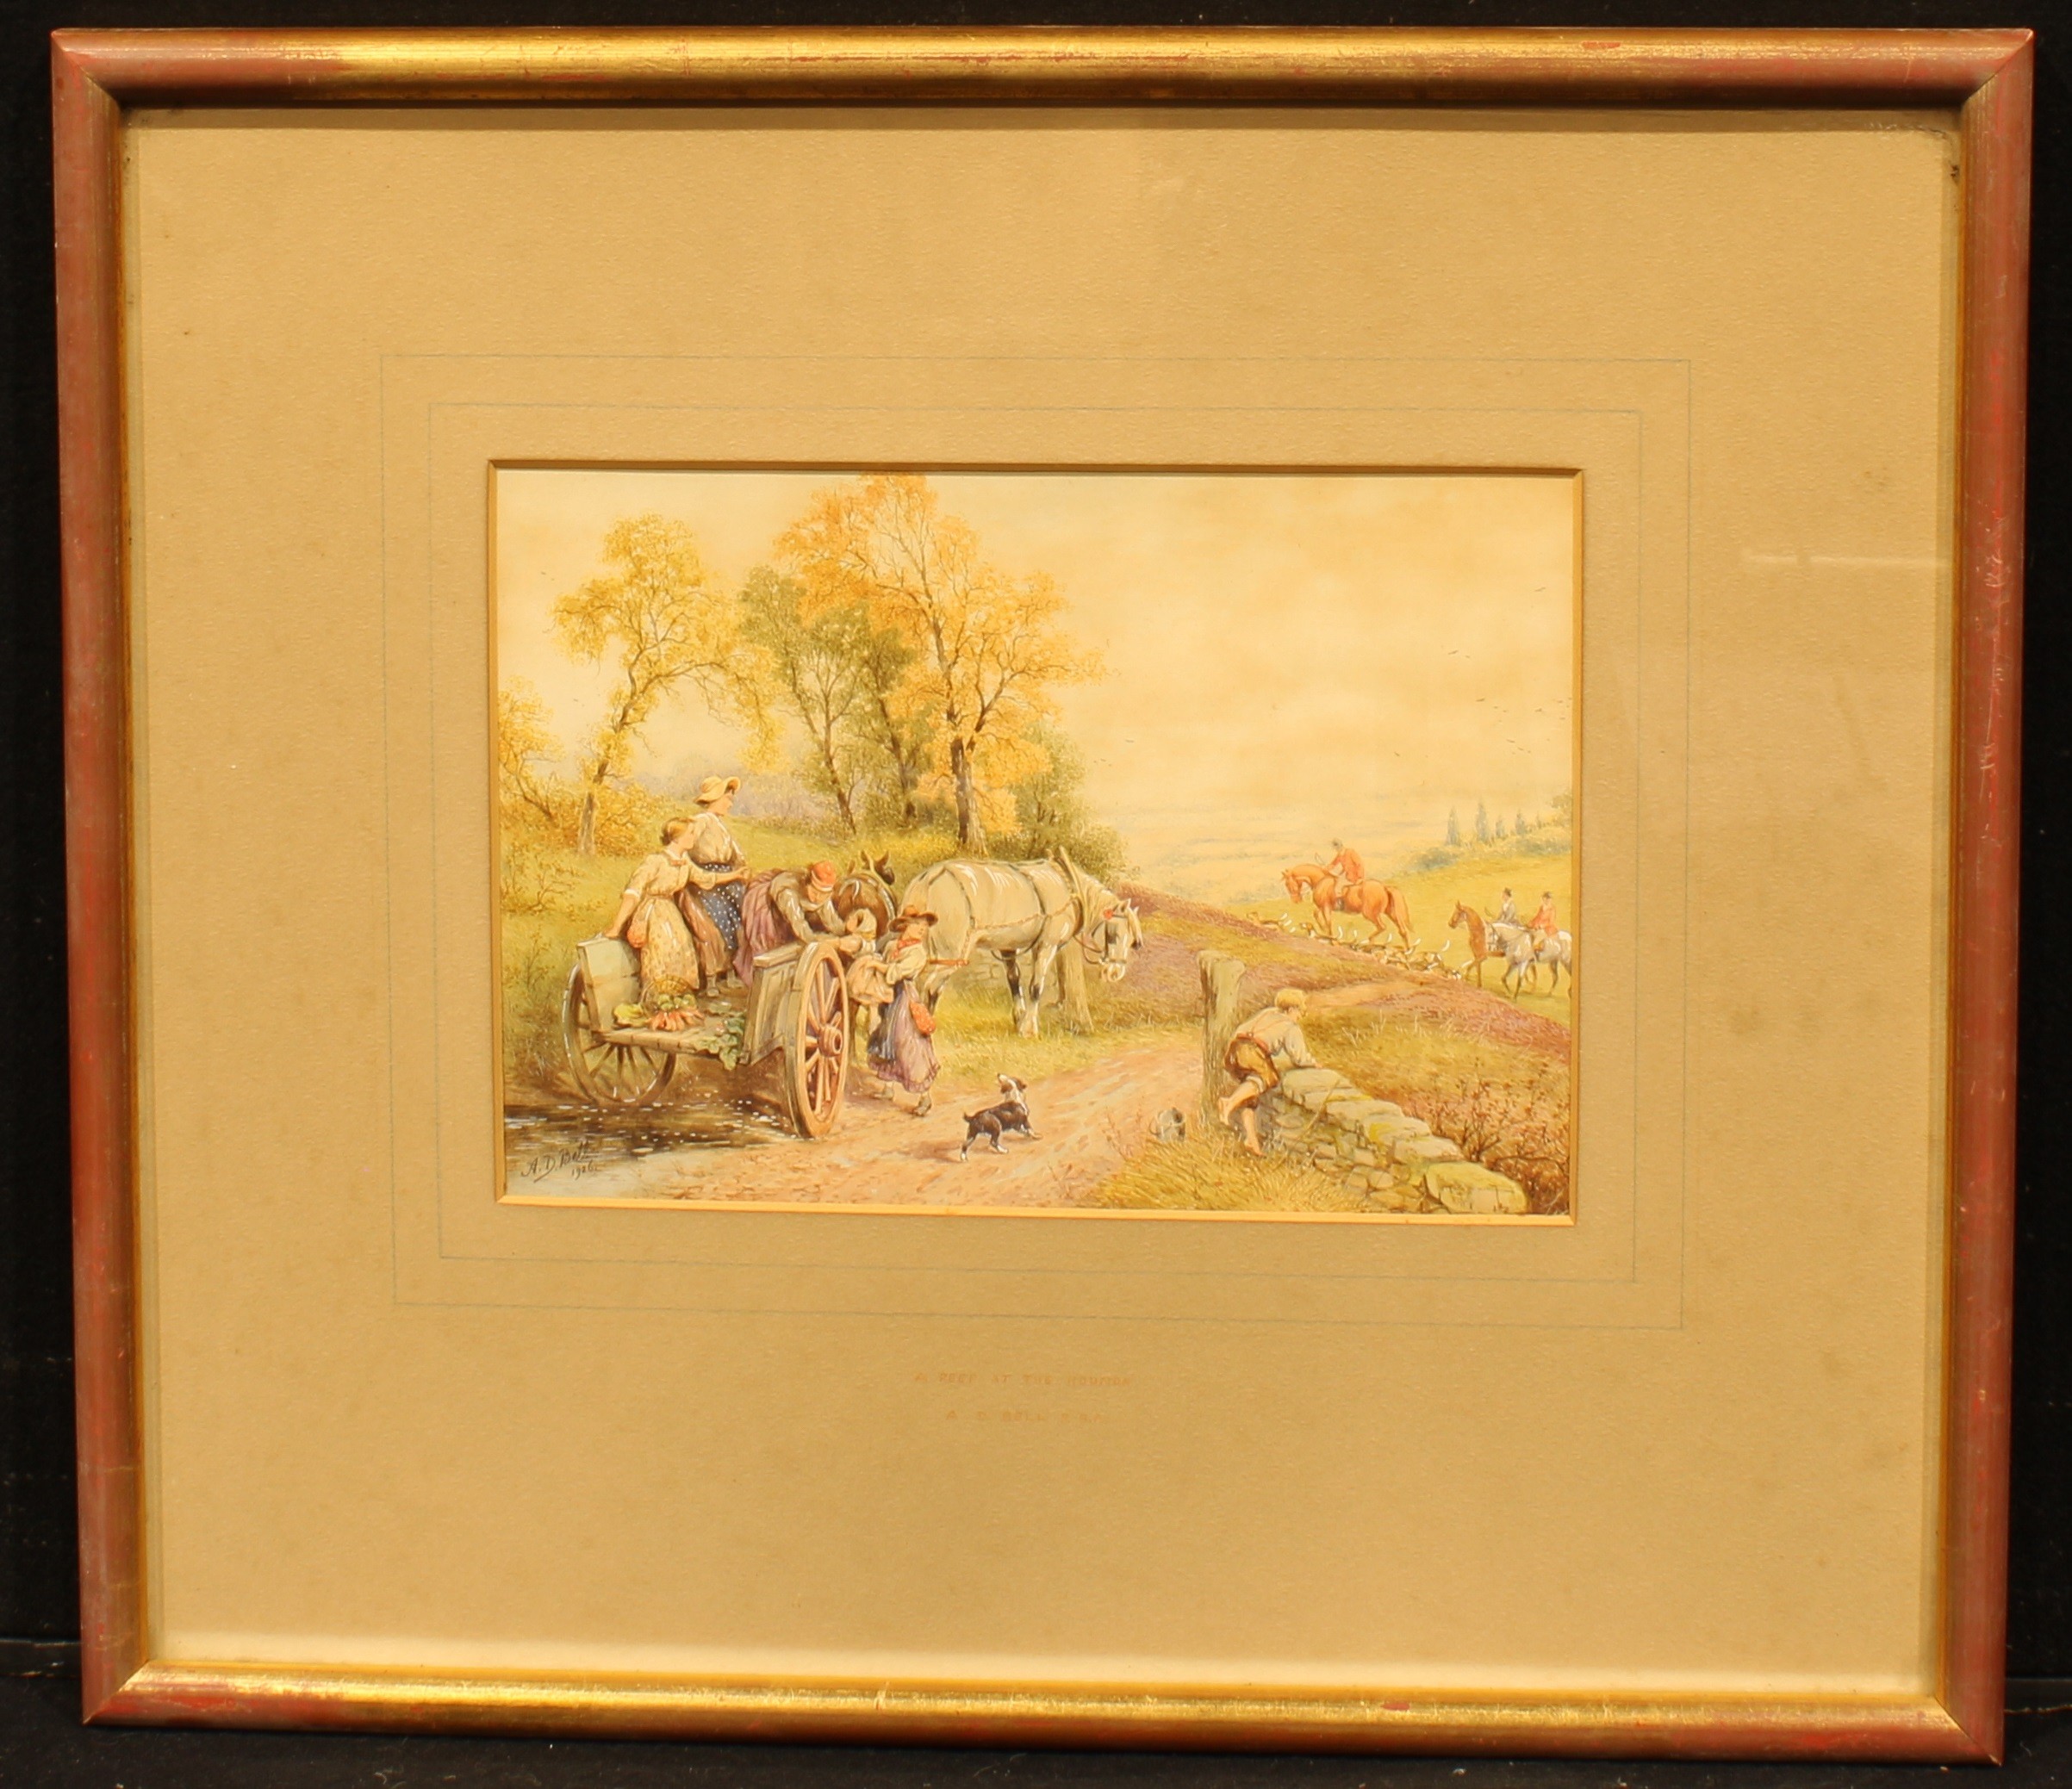 A D Bell (1884 - 1966) A Peep at the Hounds signed, dated 1926, 17.5cm x 25cm - Image 2 of 4